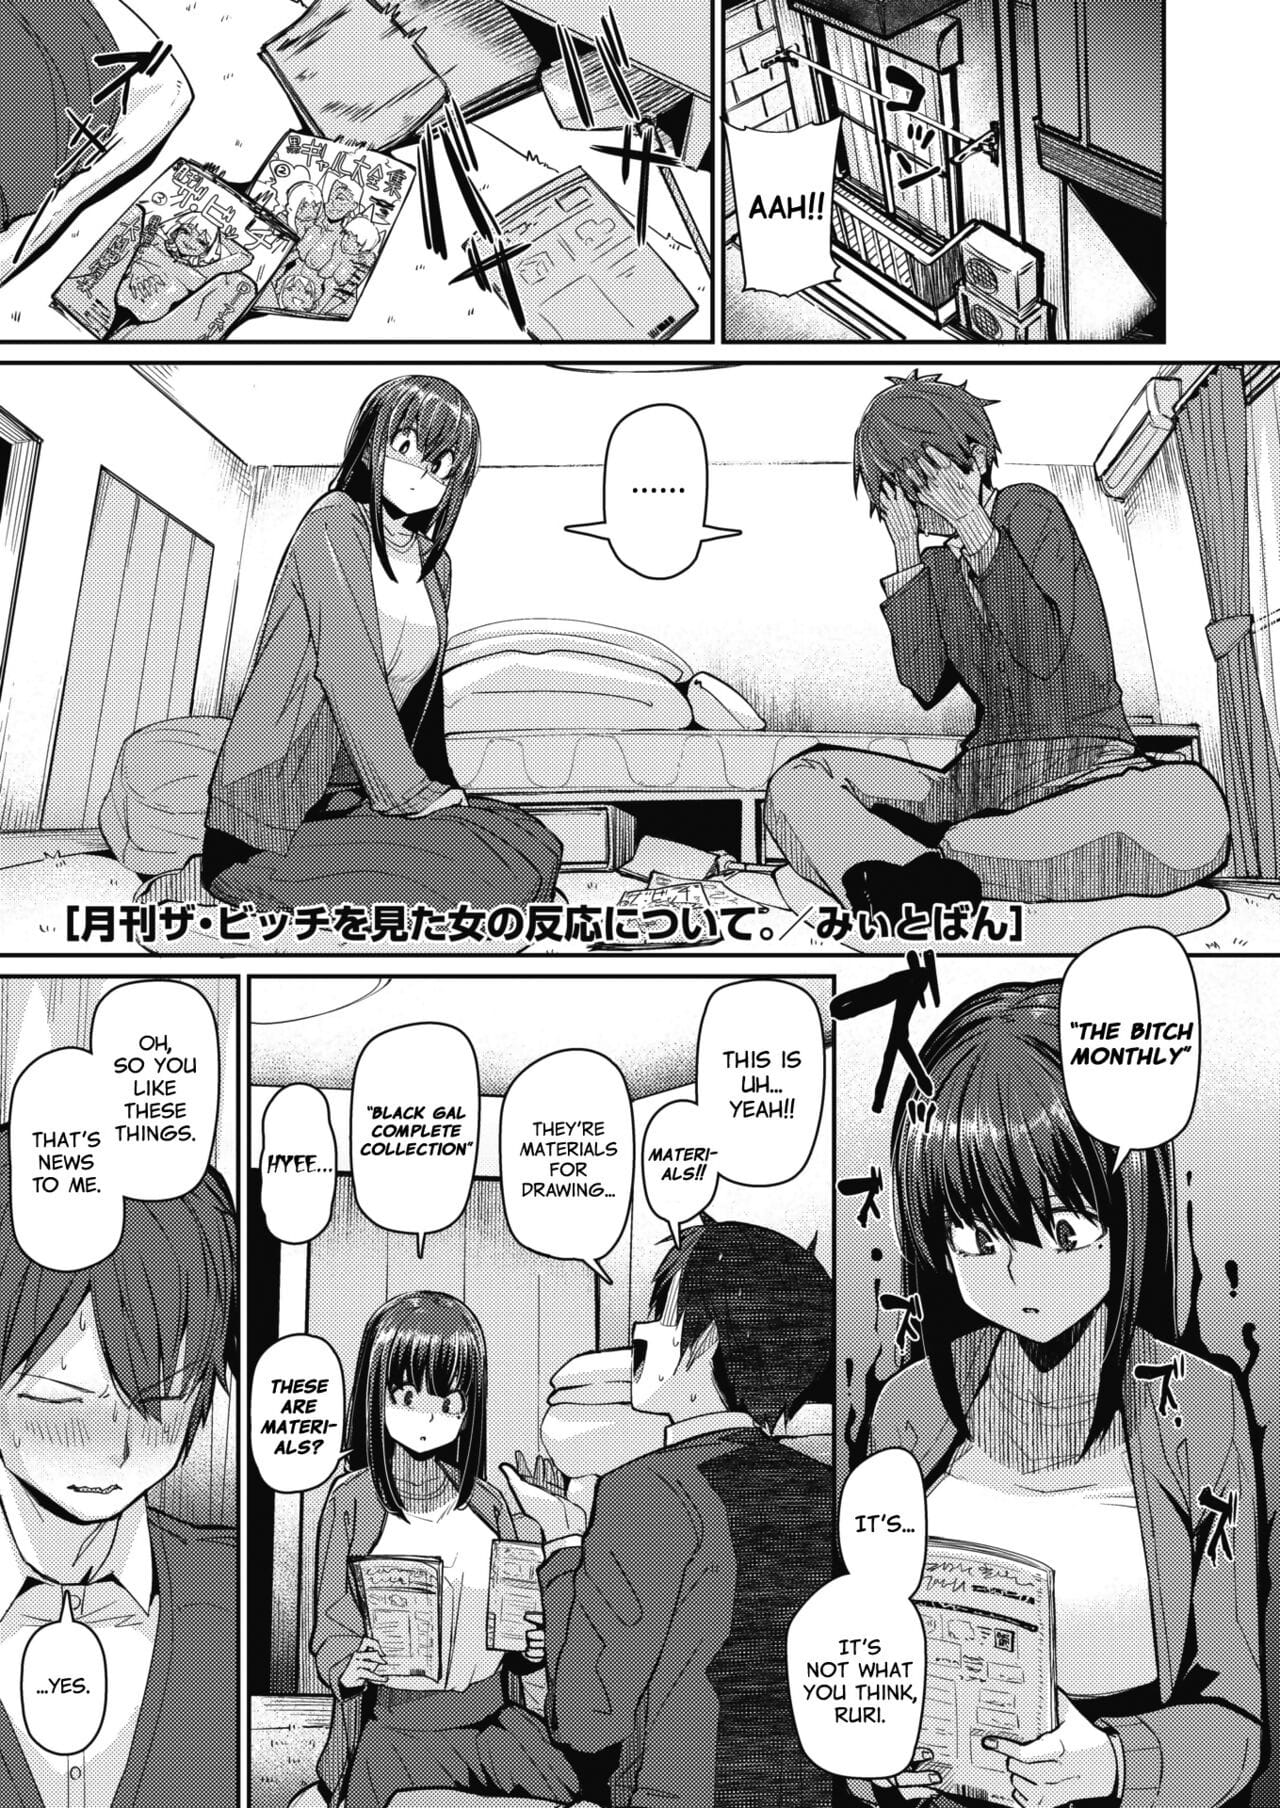 Gekkan Za Bicchi wo Mita Onna no Hannou ni Tsuite - About the Reaction of the Girl Who Saw The Bitch Monthly page 1